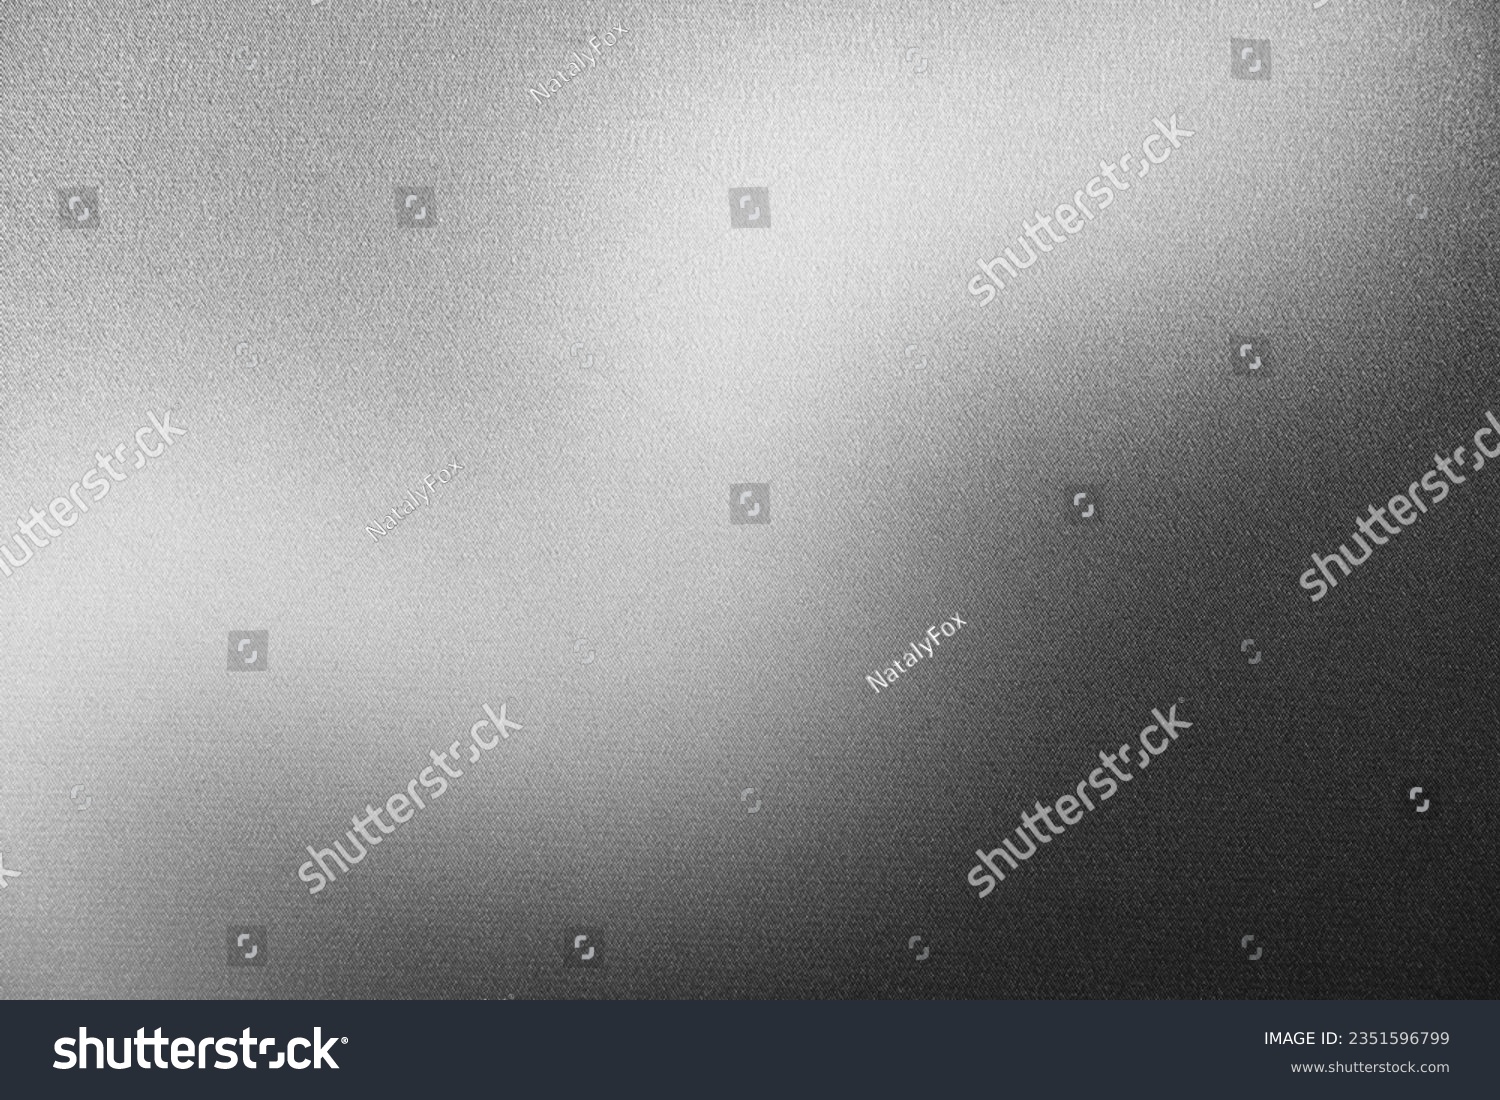 Black white dark gray silvery abstract background. Color gradient. Wave. Rough grain grainy grungy noise dust. Brushed matte shimmery blur. Light. Metallic steel metal effect. Design. #2351596799